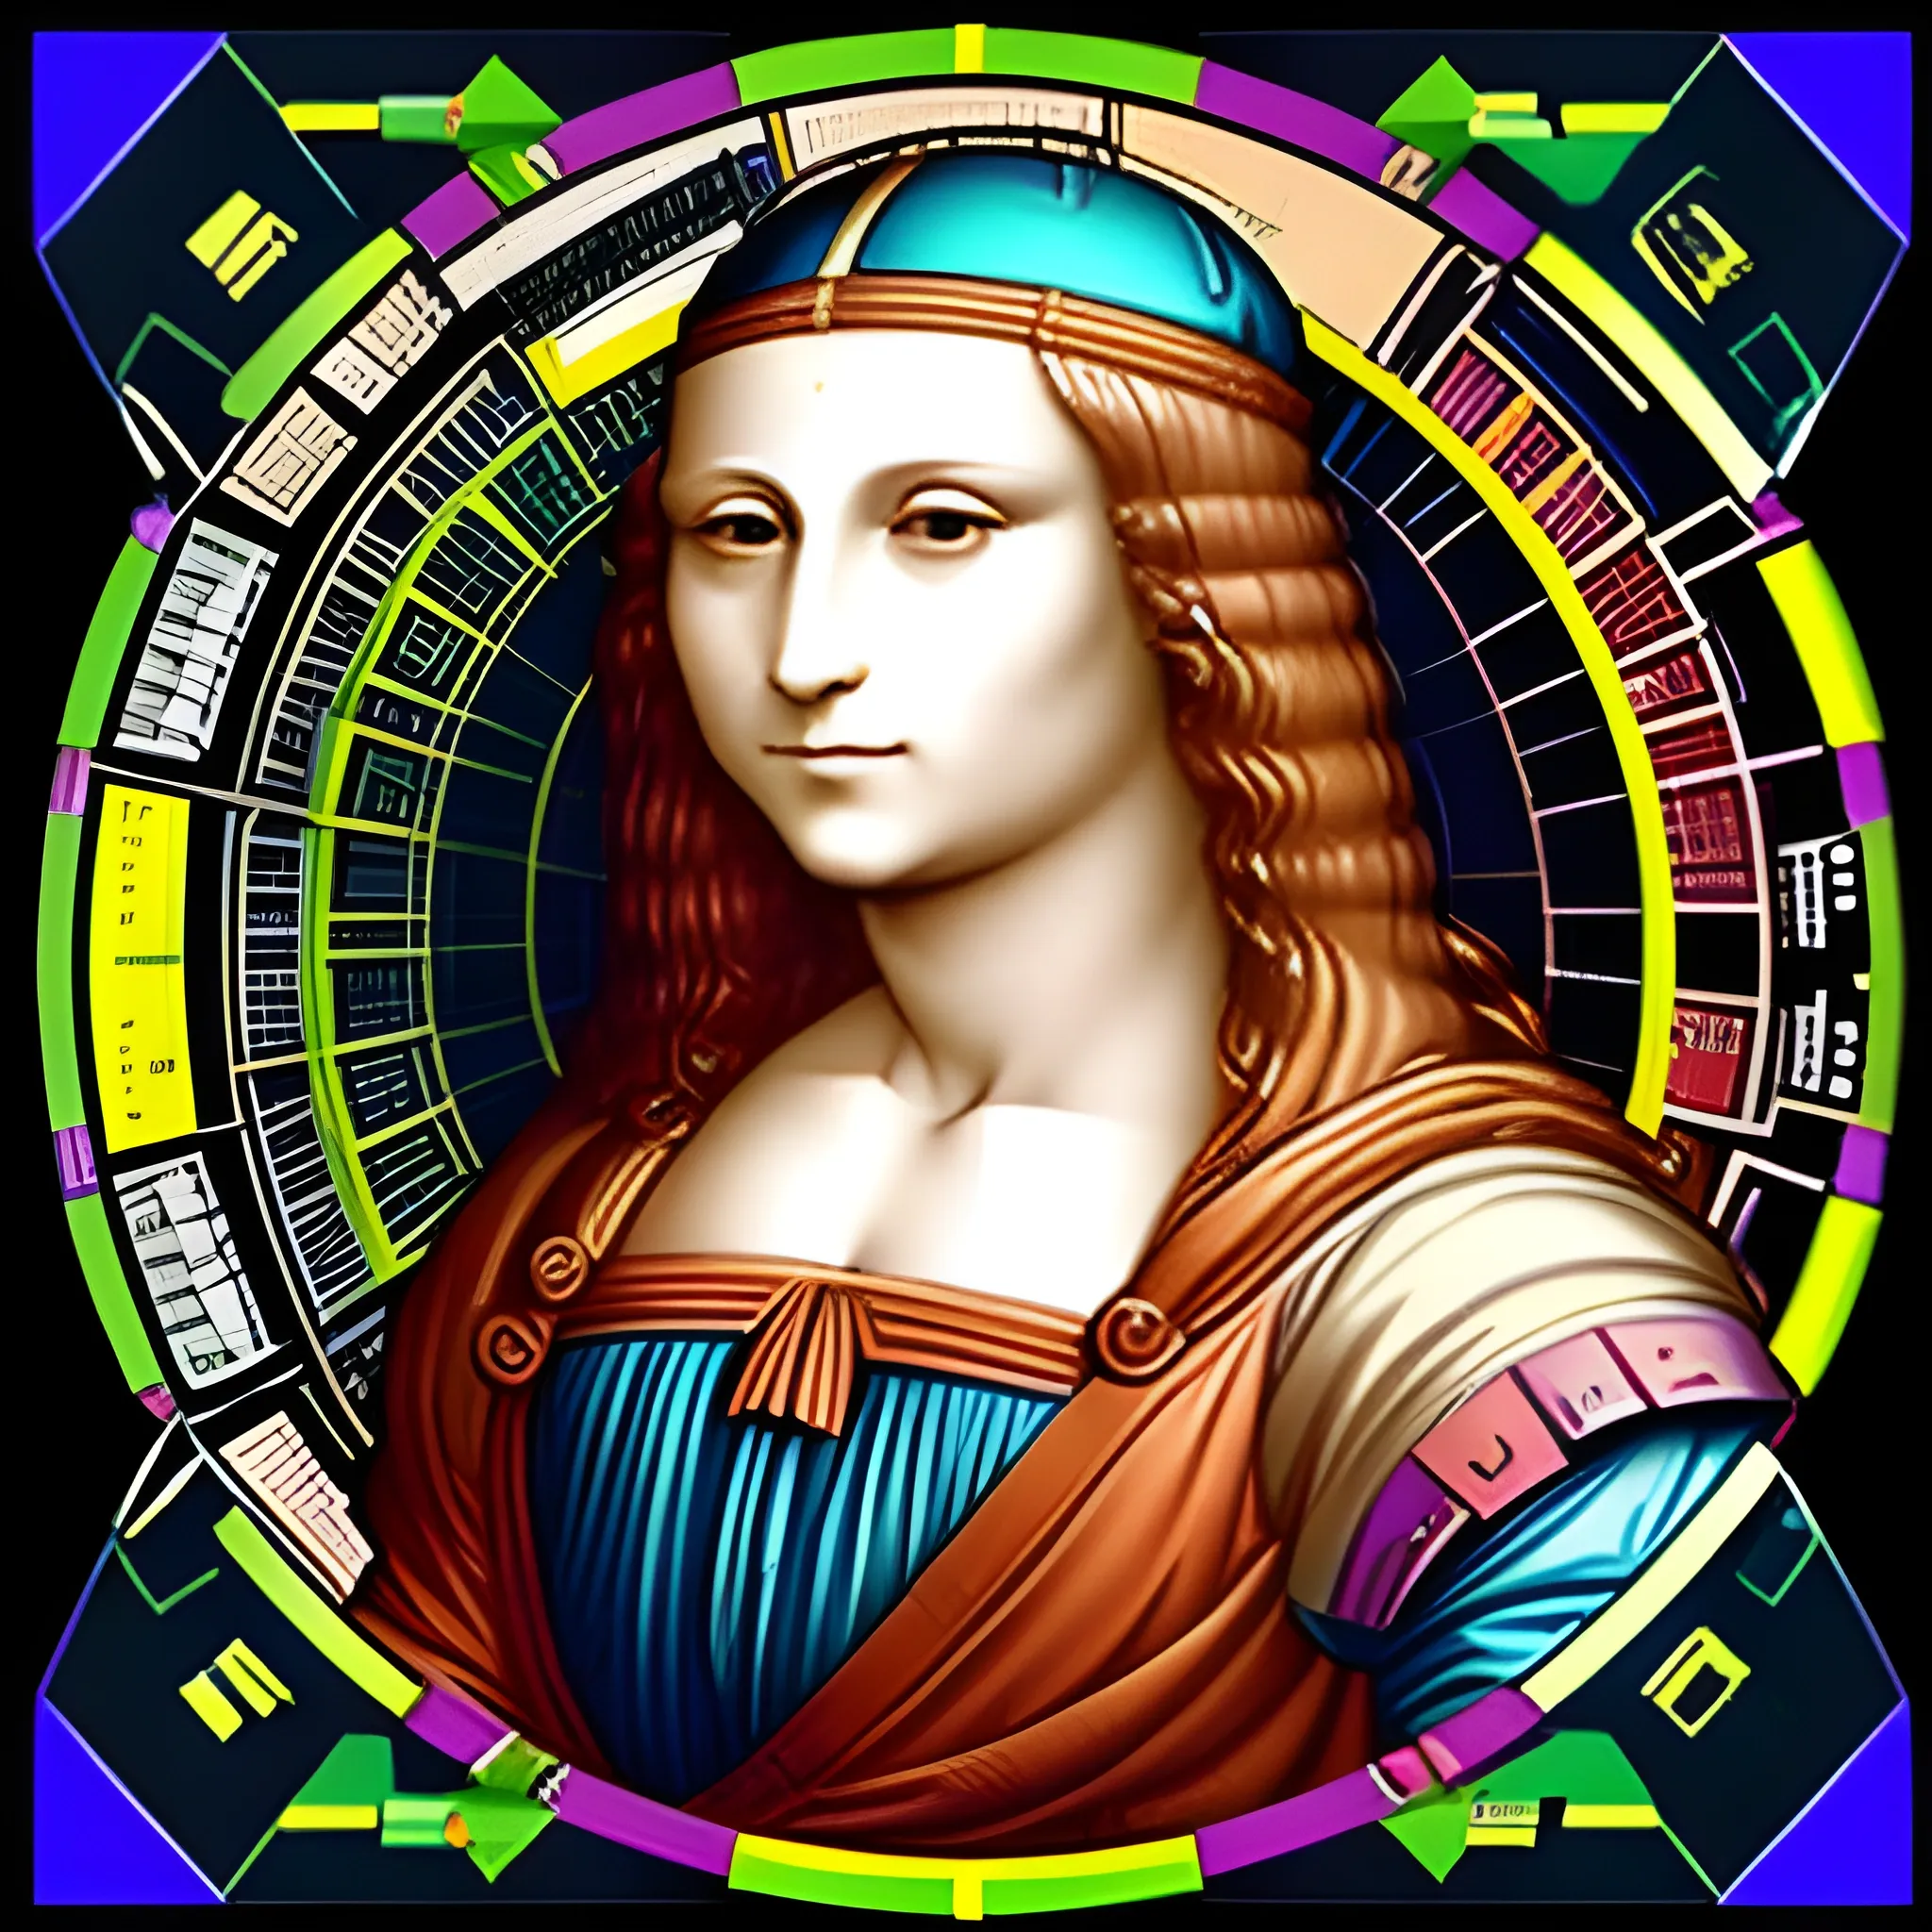 Generate a corporative, future, colorful, modern image, creative invention, related to digital products, Leonardo da Vinci as a millennial, do not use machines or txt and use really environment,Trippy